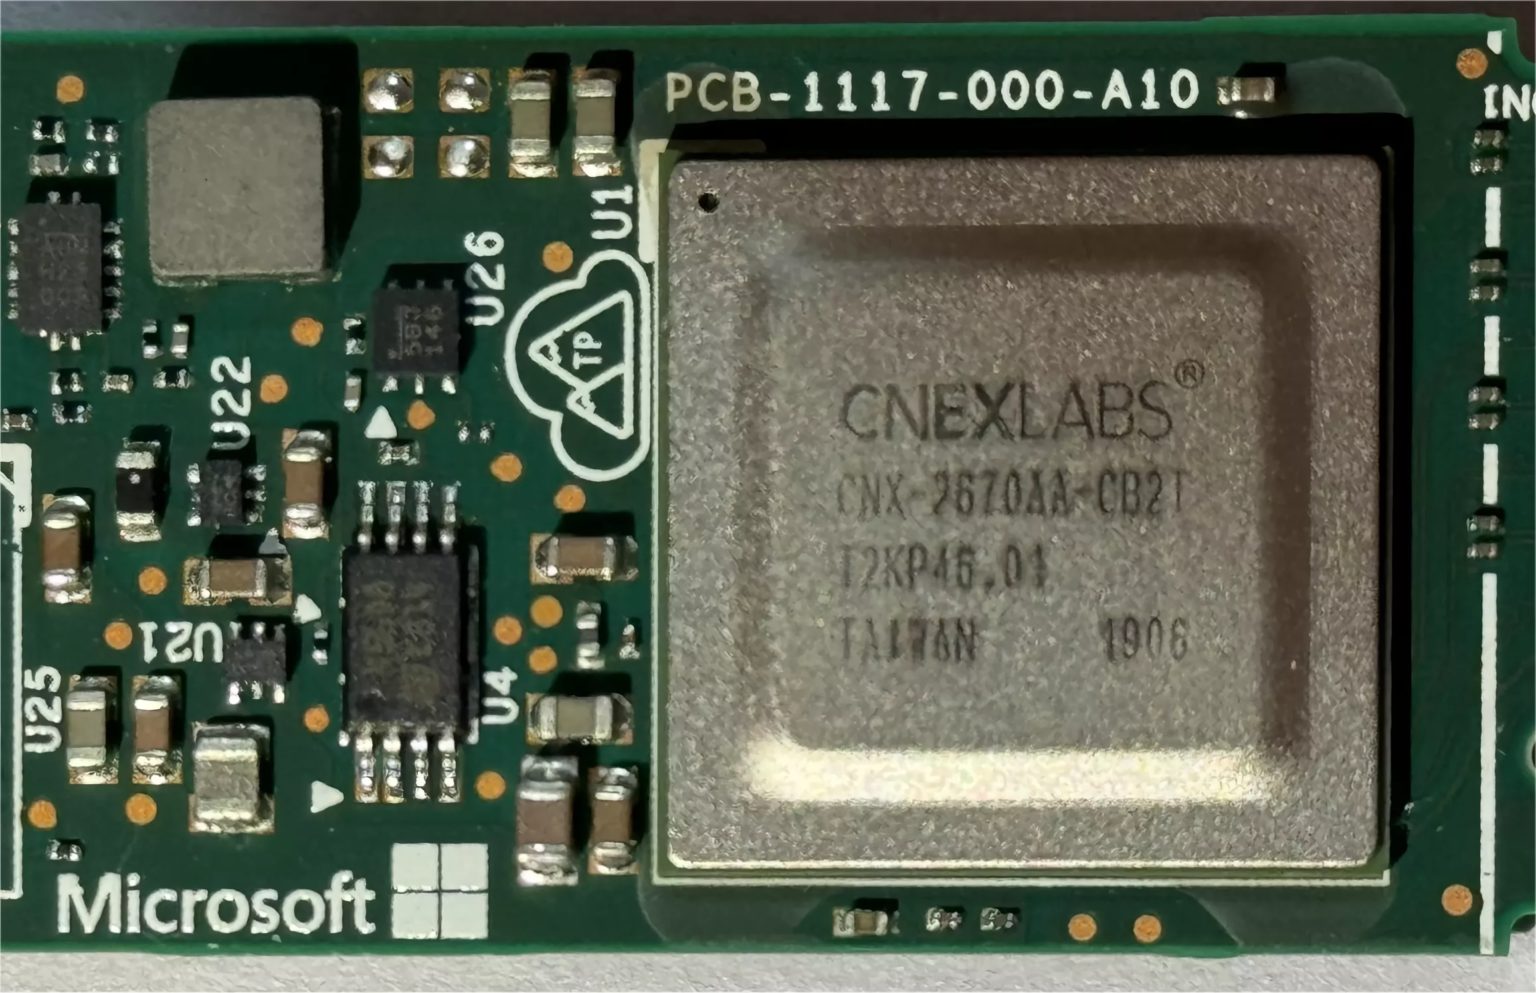 Microsoft Z1000 SSD engineering sample highlights enterprise collaboration with CNEX Labs